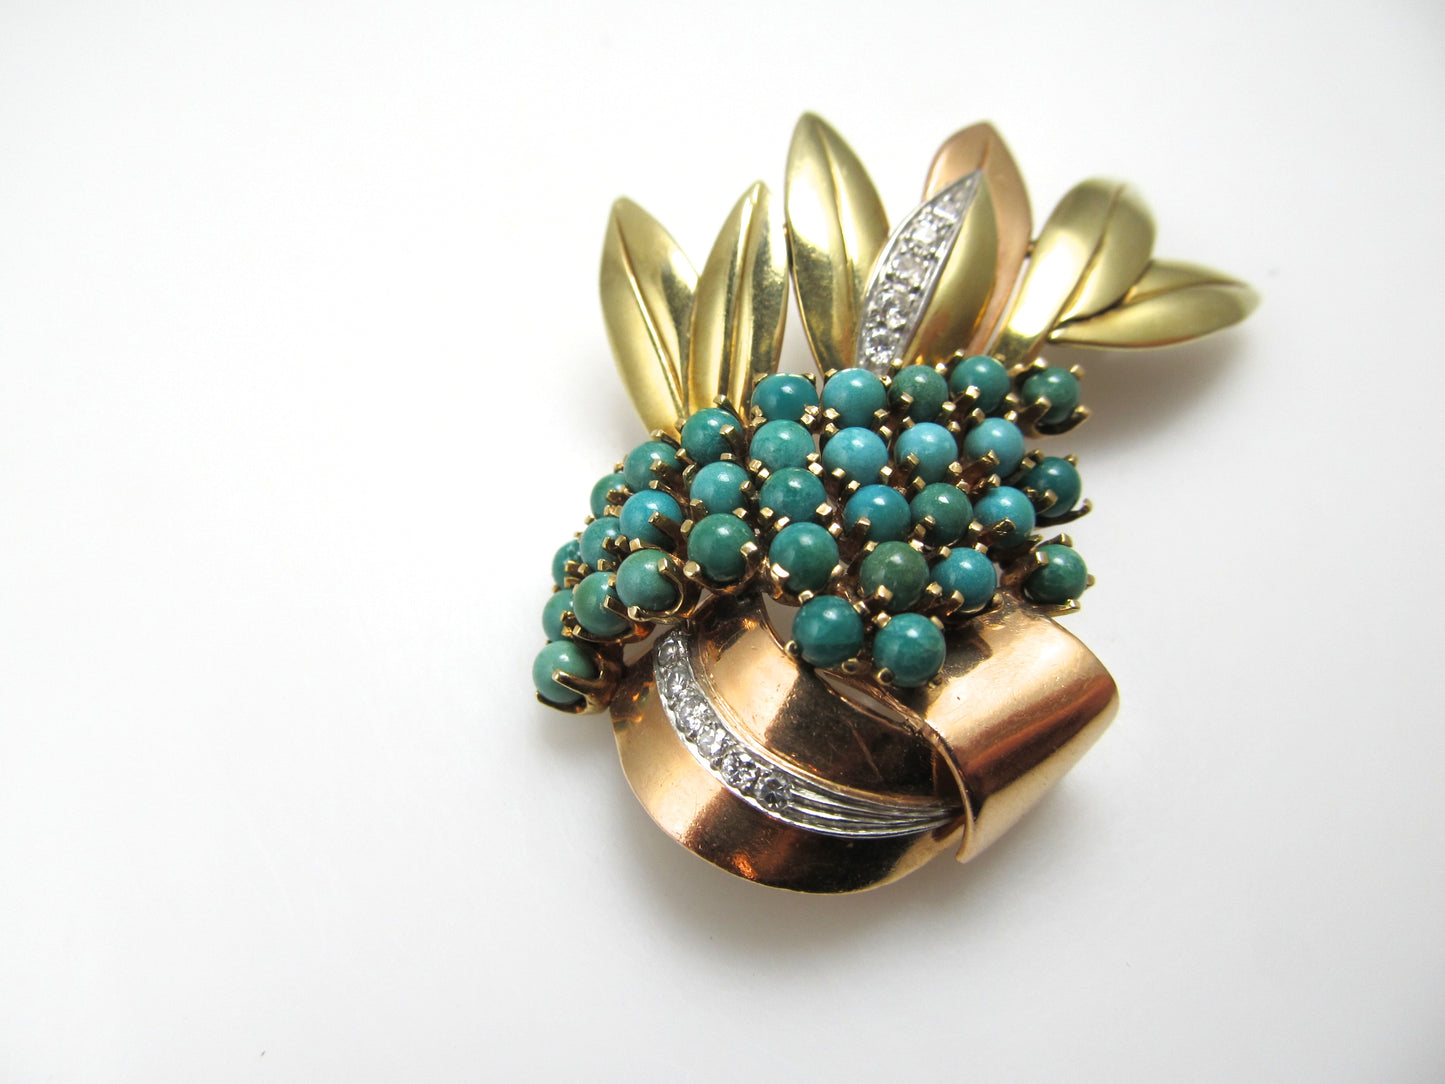 Vintage Retro 14k Rose And Yellow Gold Pin With Diamonds And Turquoise, Circa 1940.